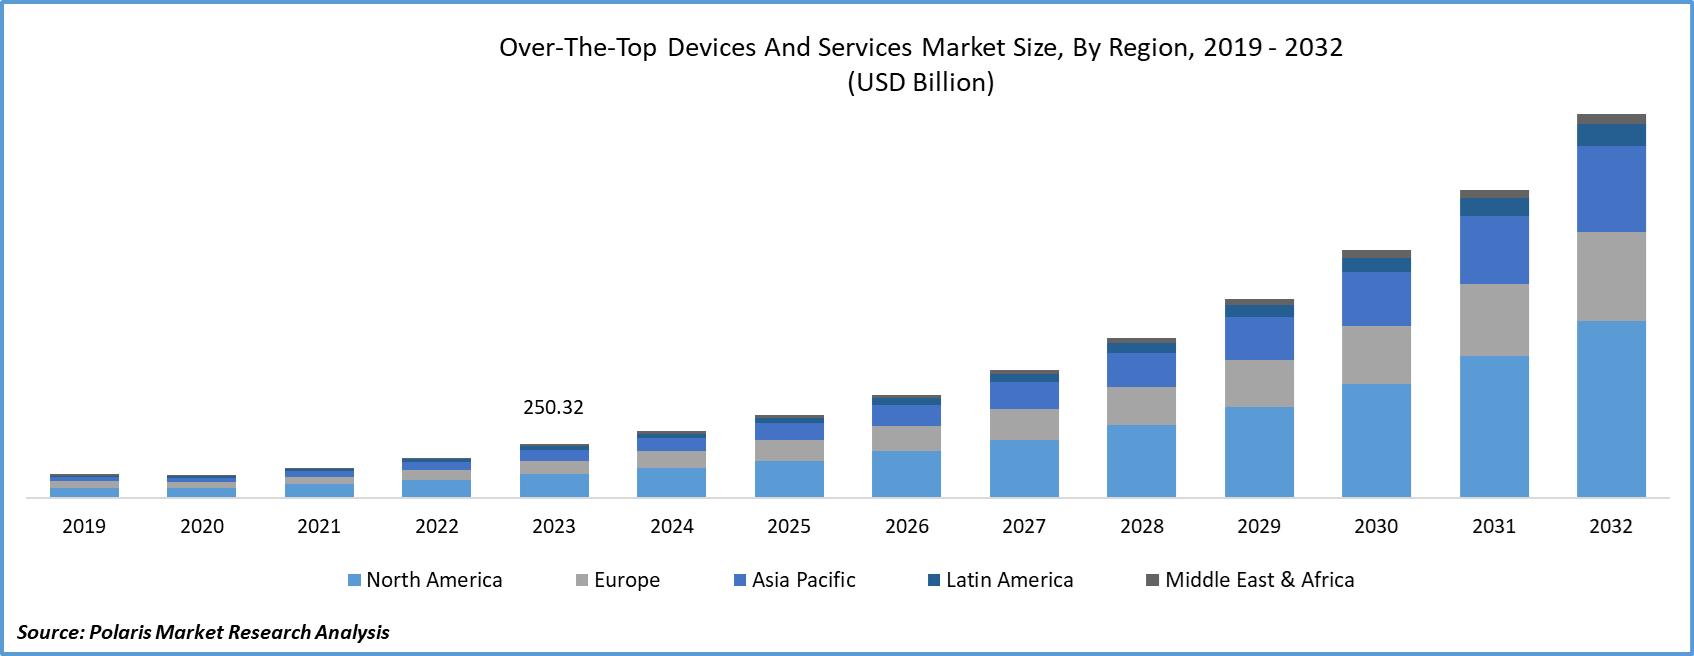 Over-The-Top Devices and Services Market Size